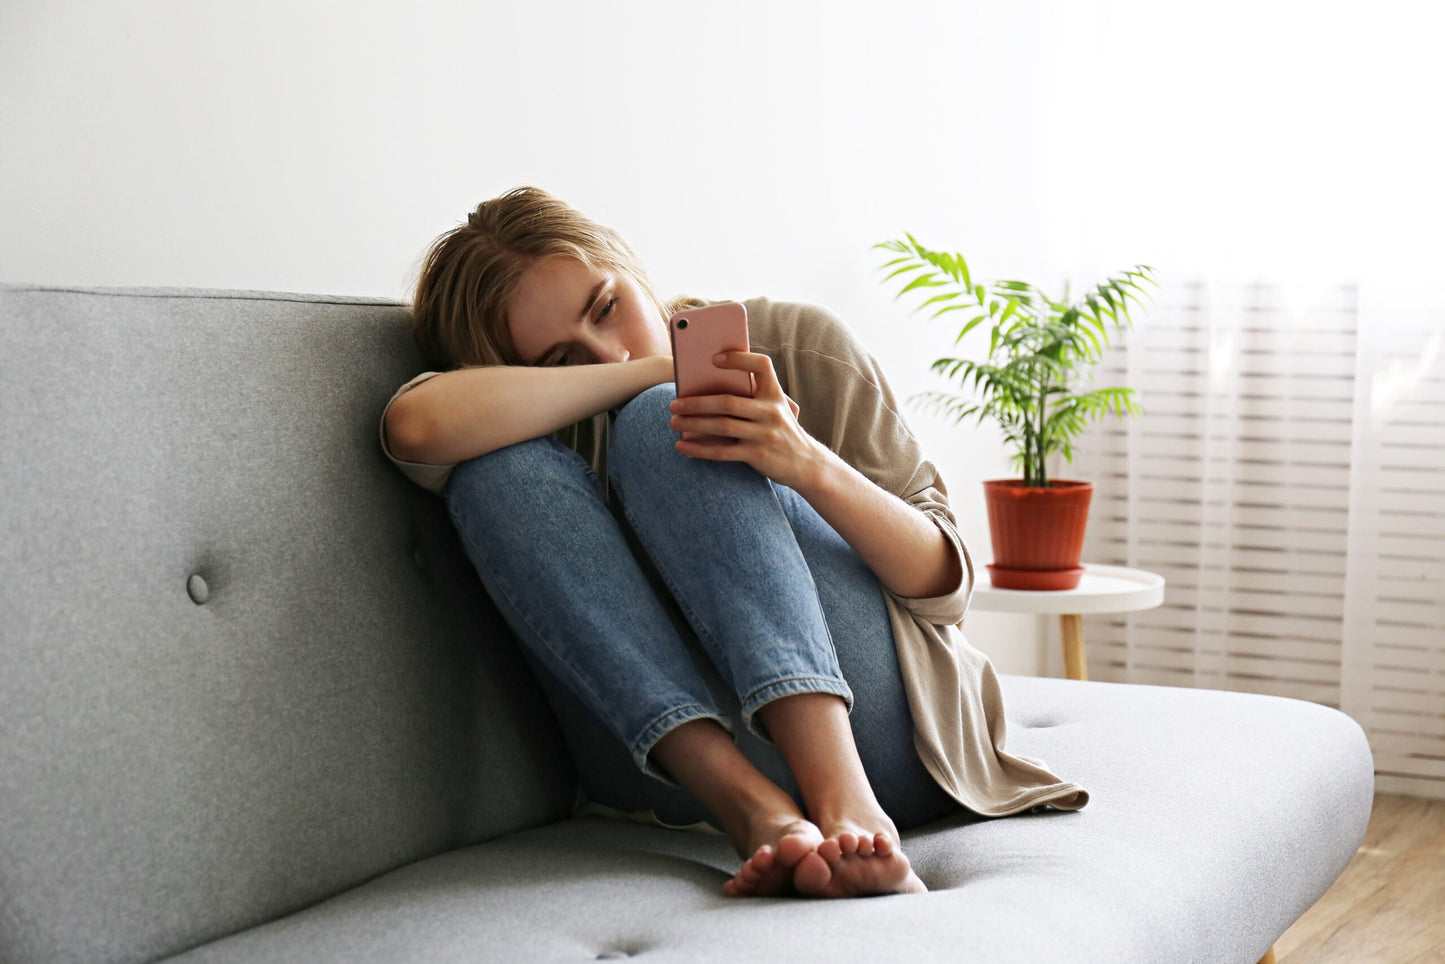 Photo of a depressed looking young woman sitting on a couch looking at her cell phone